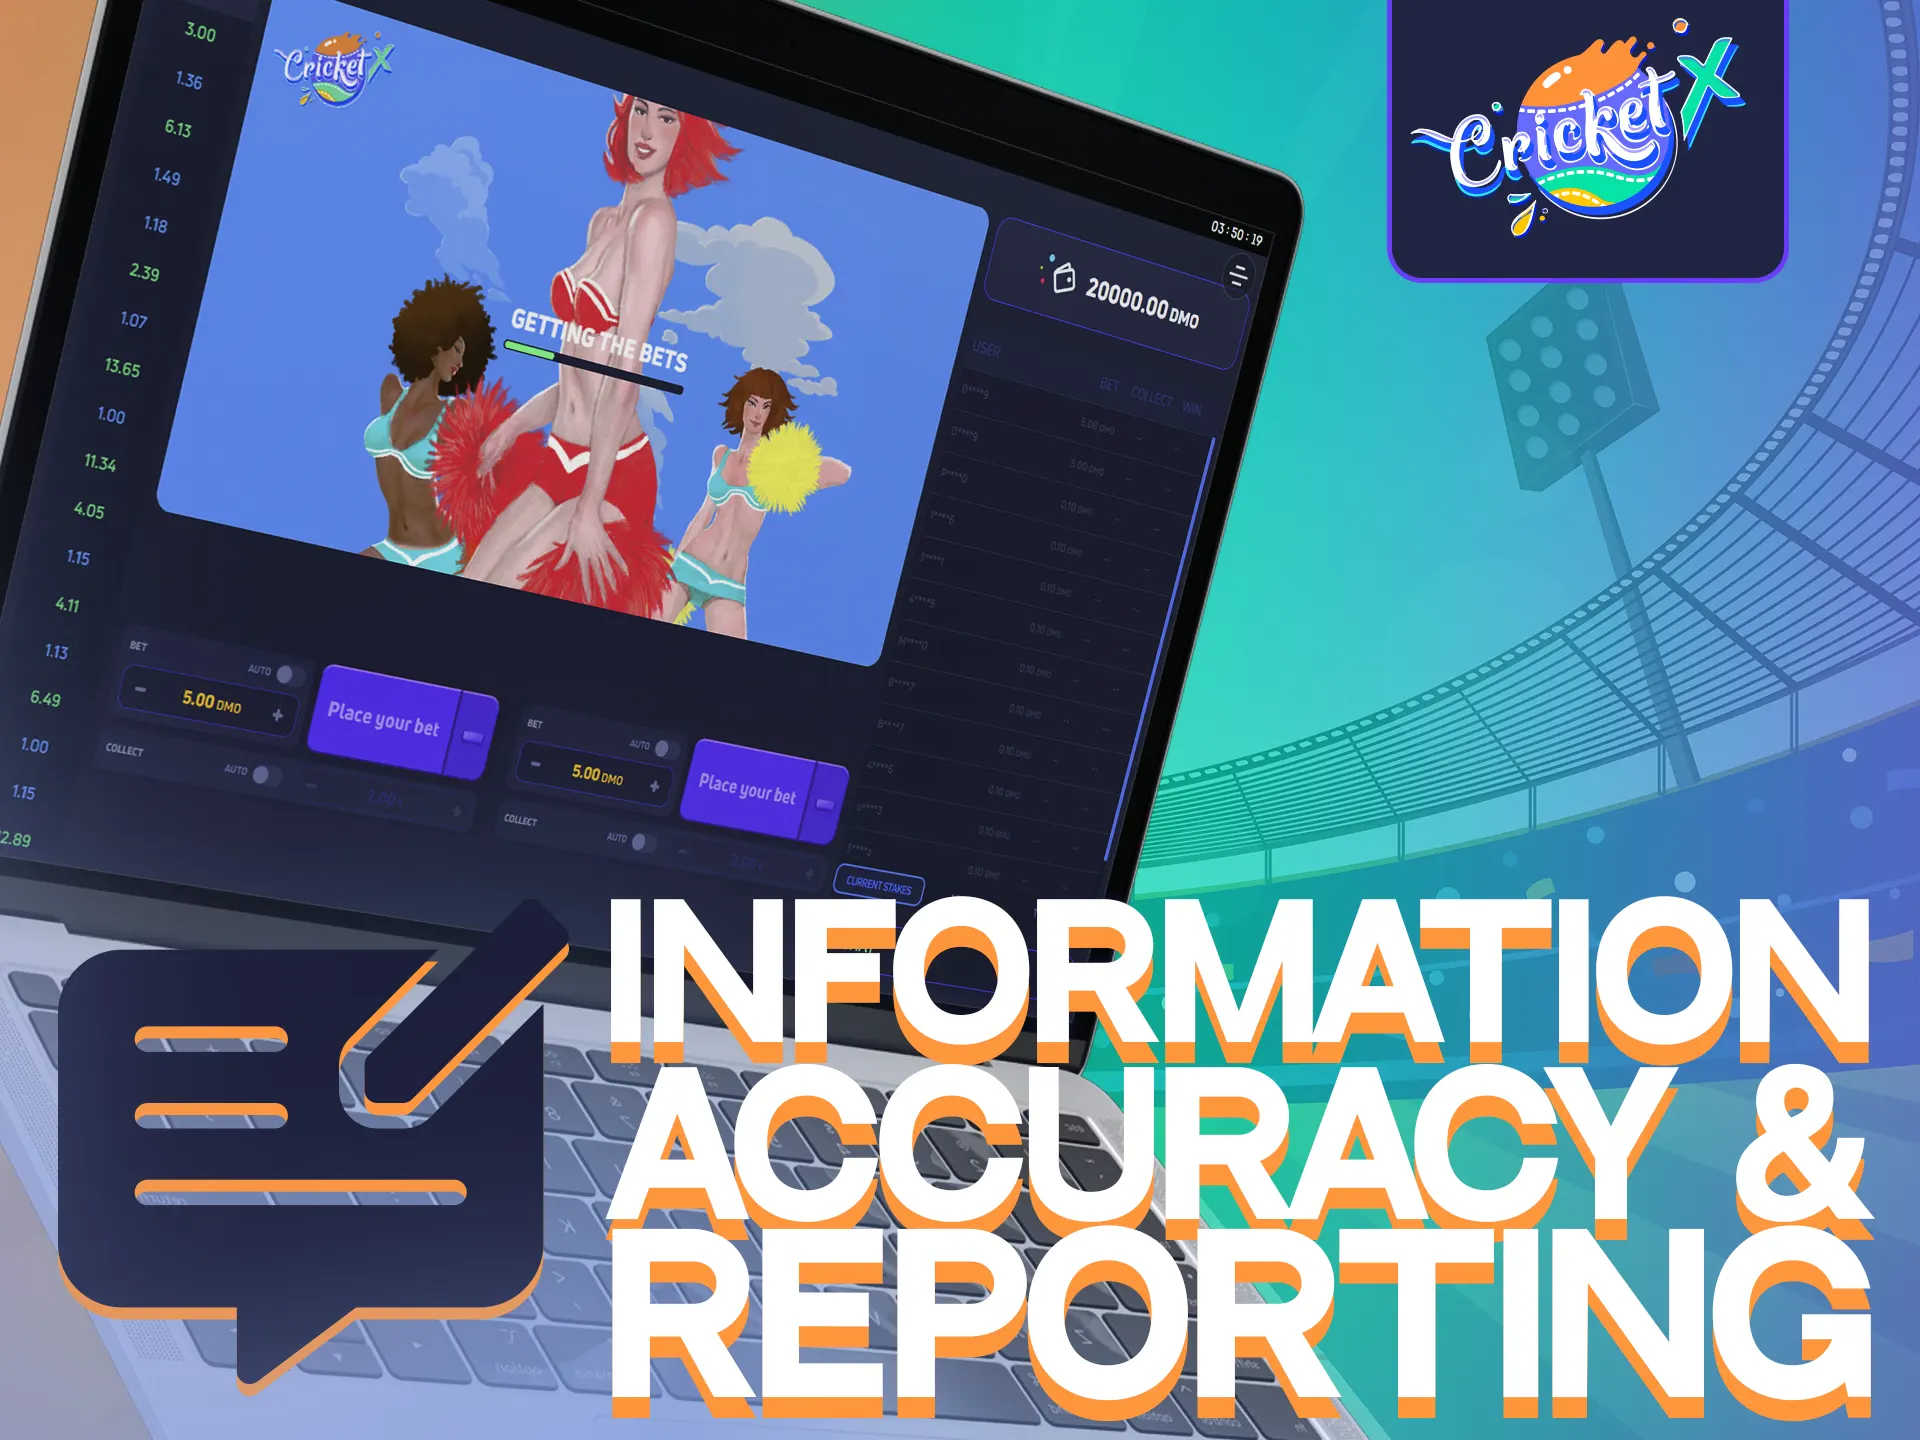 We are committed to the accuracy and reliability of information about the Cricket-X game.